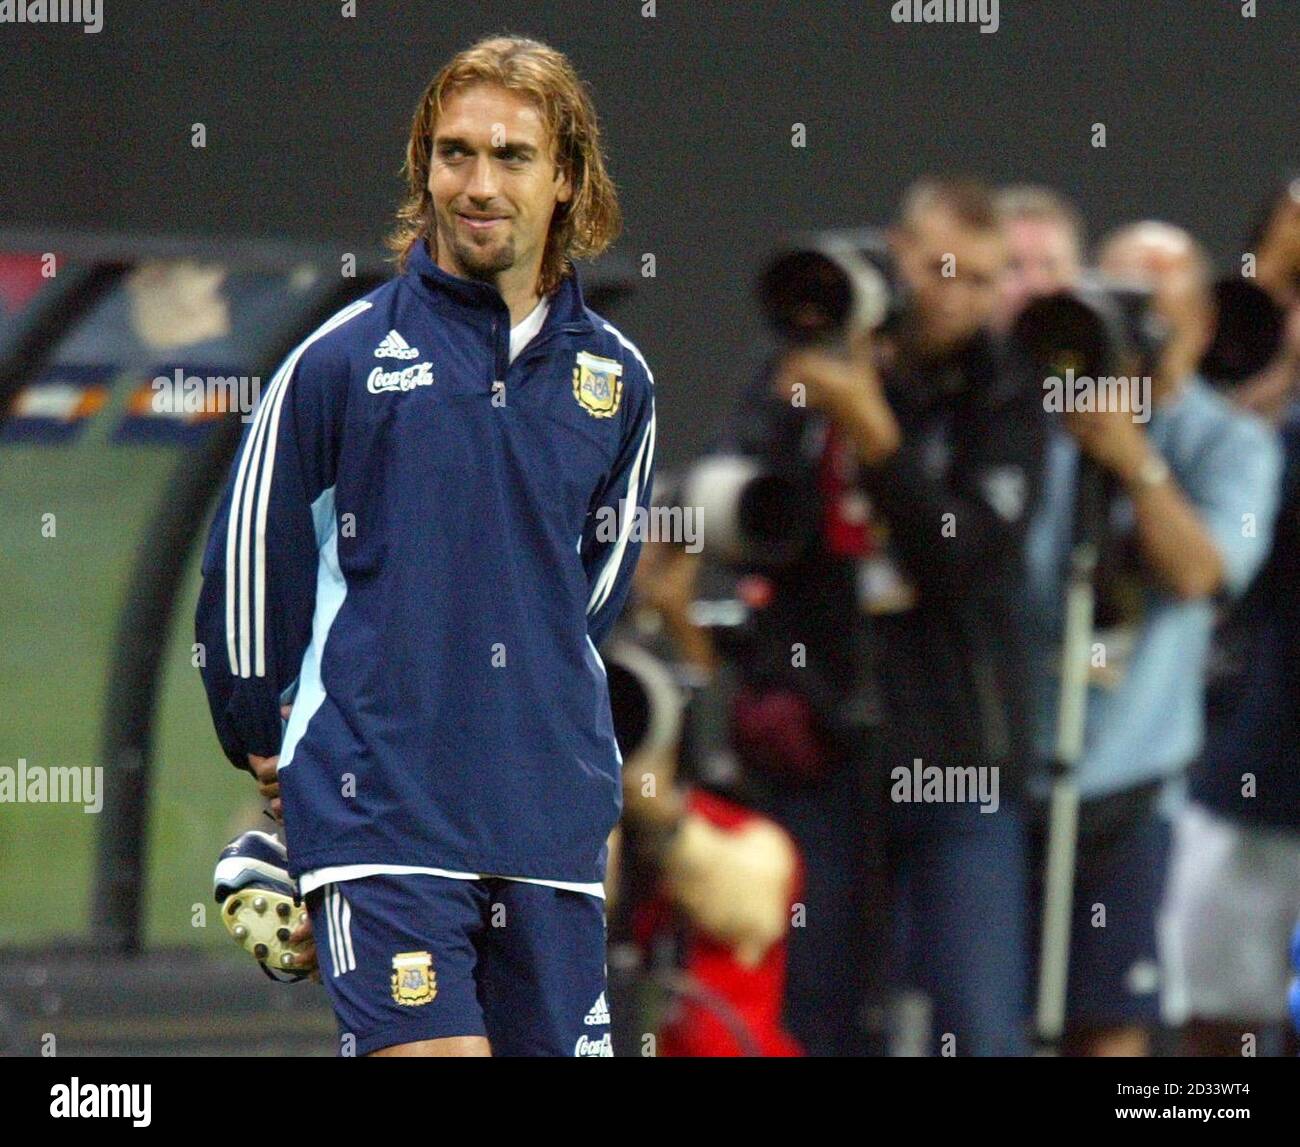 Argentina striker Gabriel Batistuta during training at the Sapporo Dome, Sapporo, Japan. Argentina play their second match of the World Cup against group F opponents England on Friday.   Stock Photo